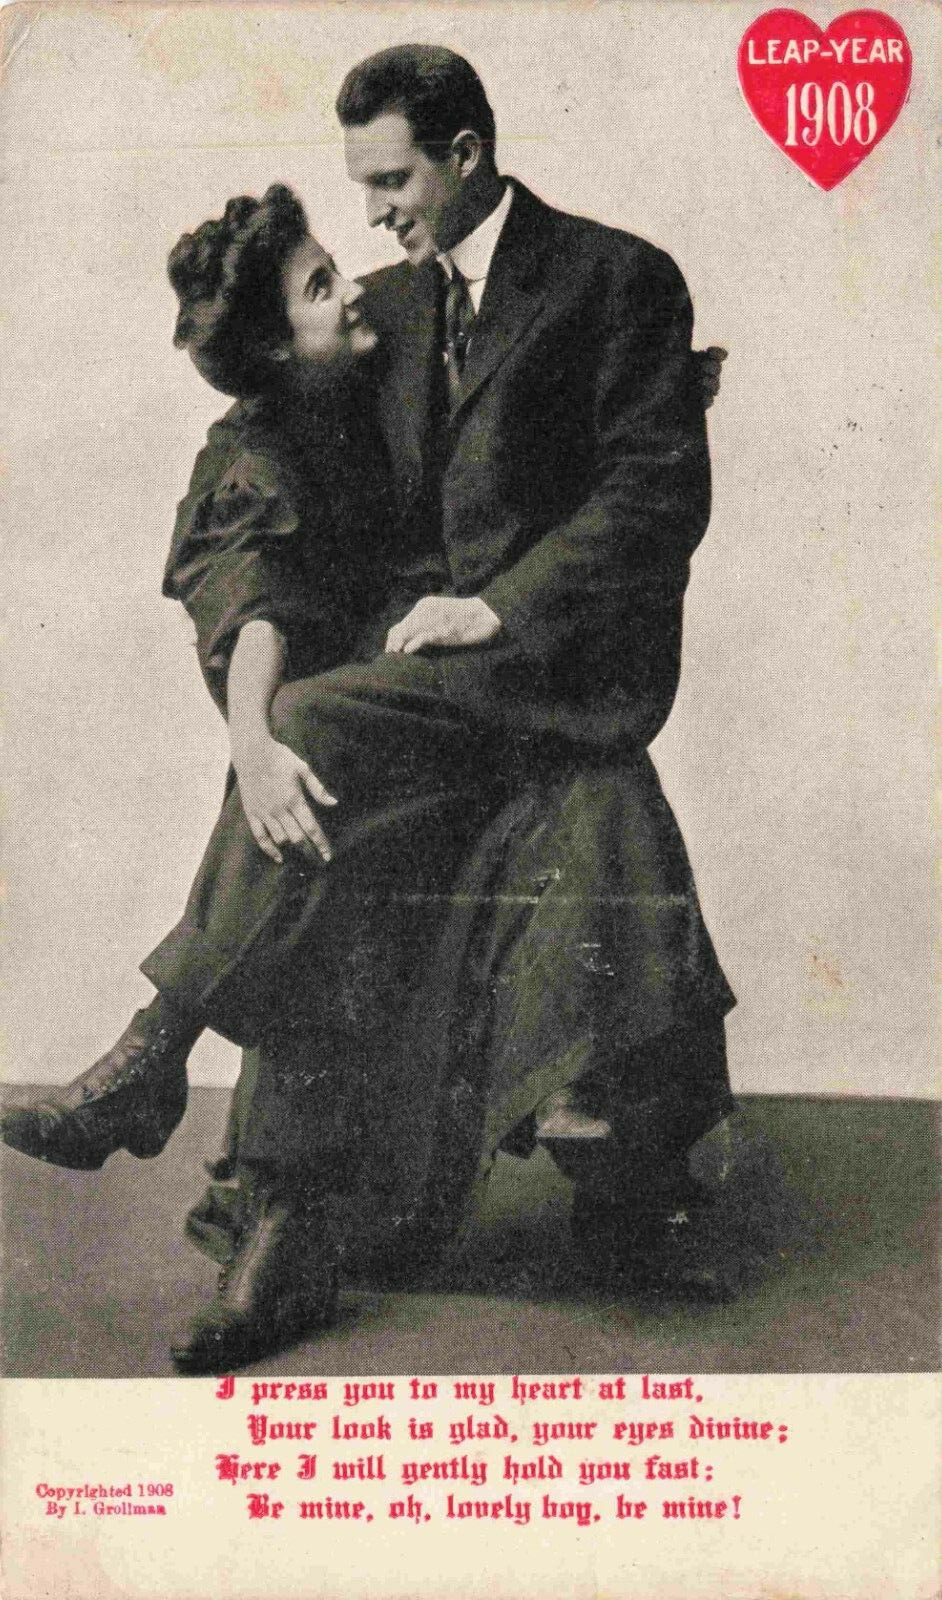 Leap Year 1908 Man Sits on Lady's Lap Love Poem From Her to Him Vintage Postcard